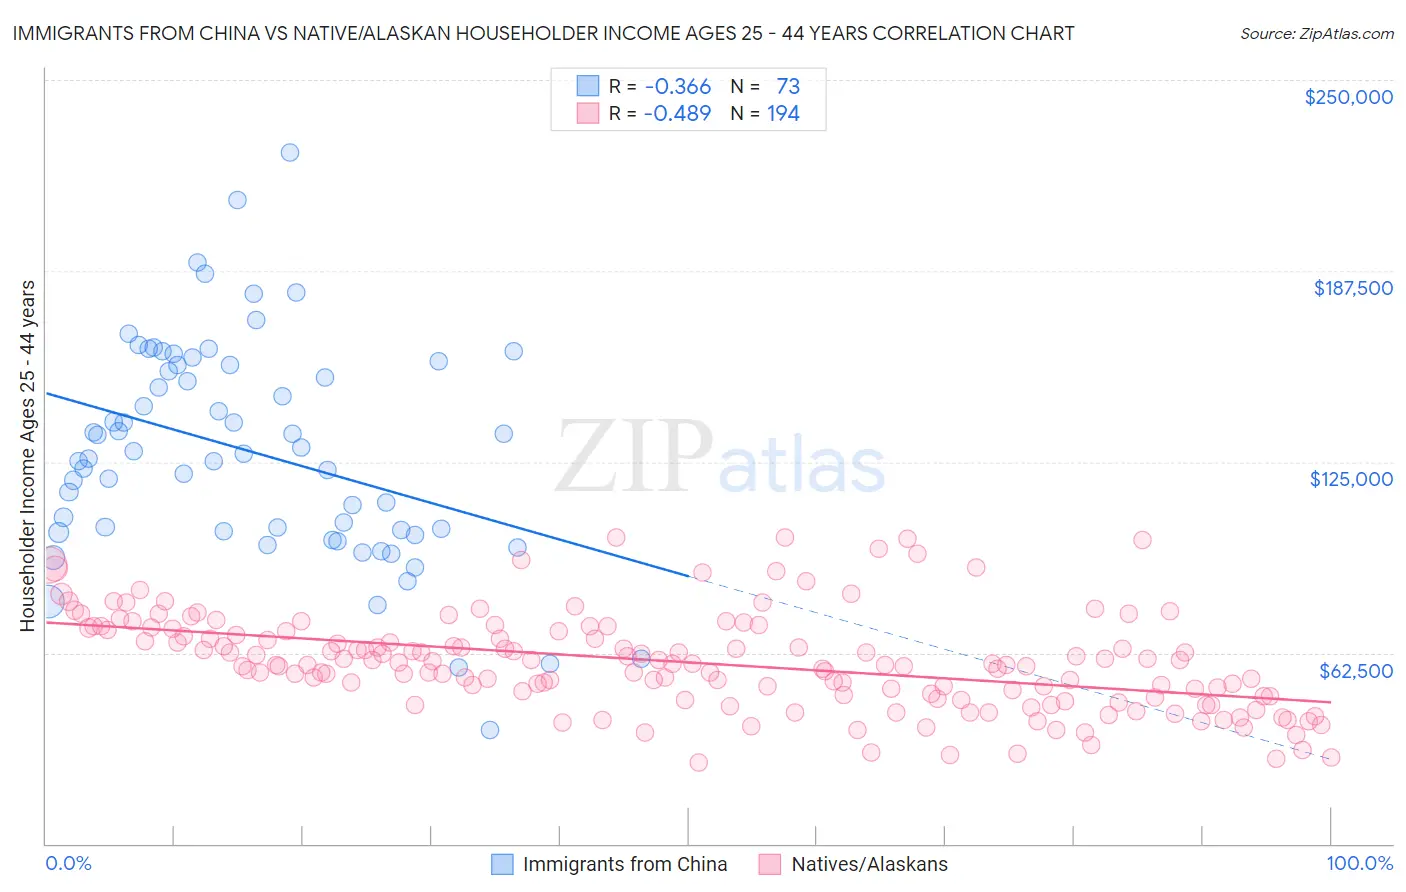 Immigrants from China vs Native/Alaskan Householder Income Ages 25 - 44 years